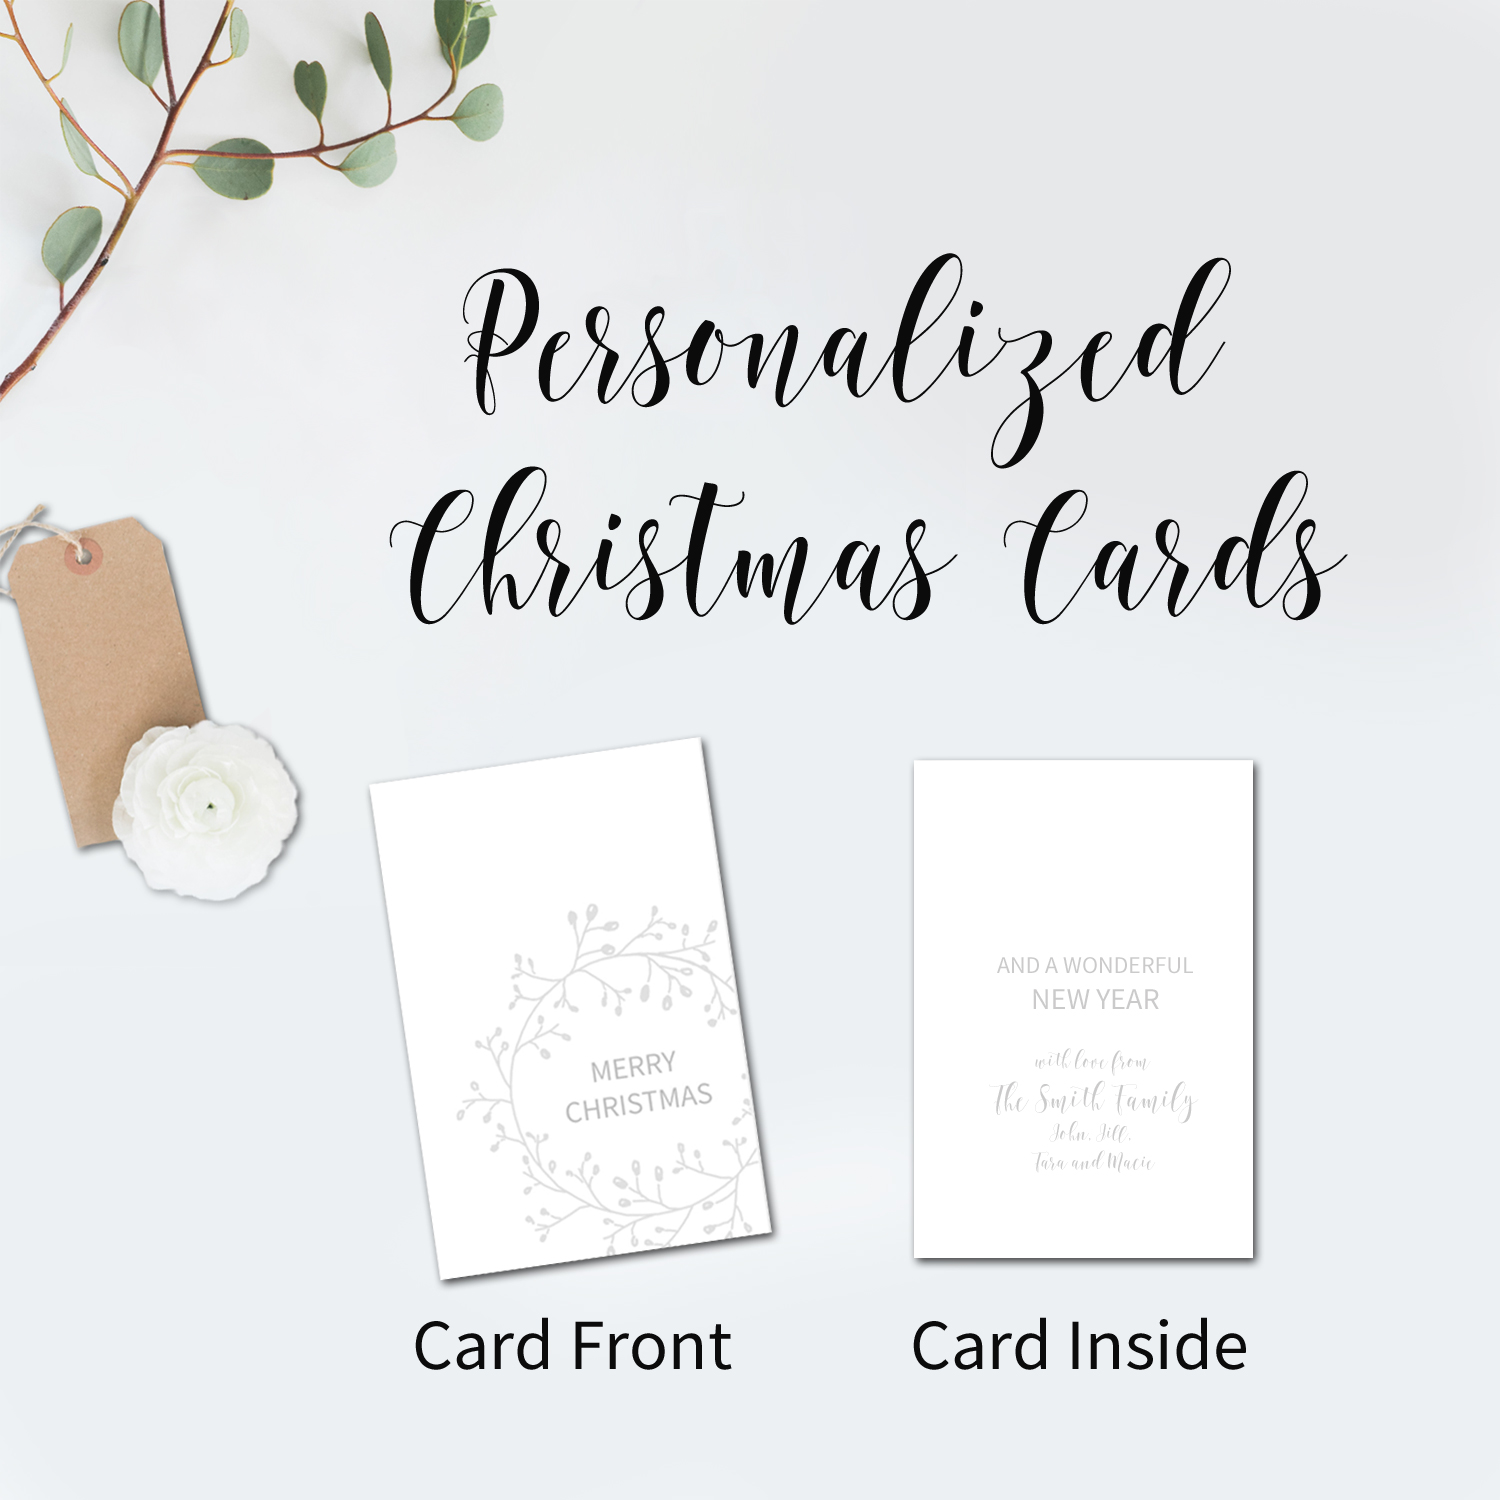 Personalized Christmas Cards For Friends Family Or Business Kimenink Com